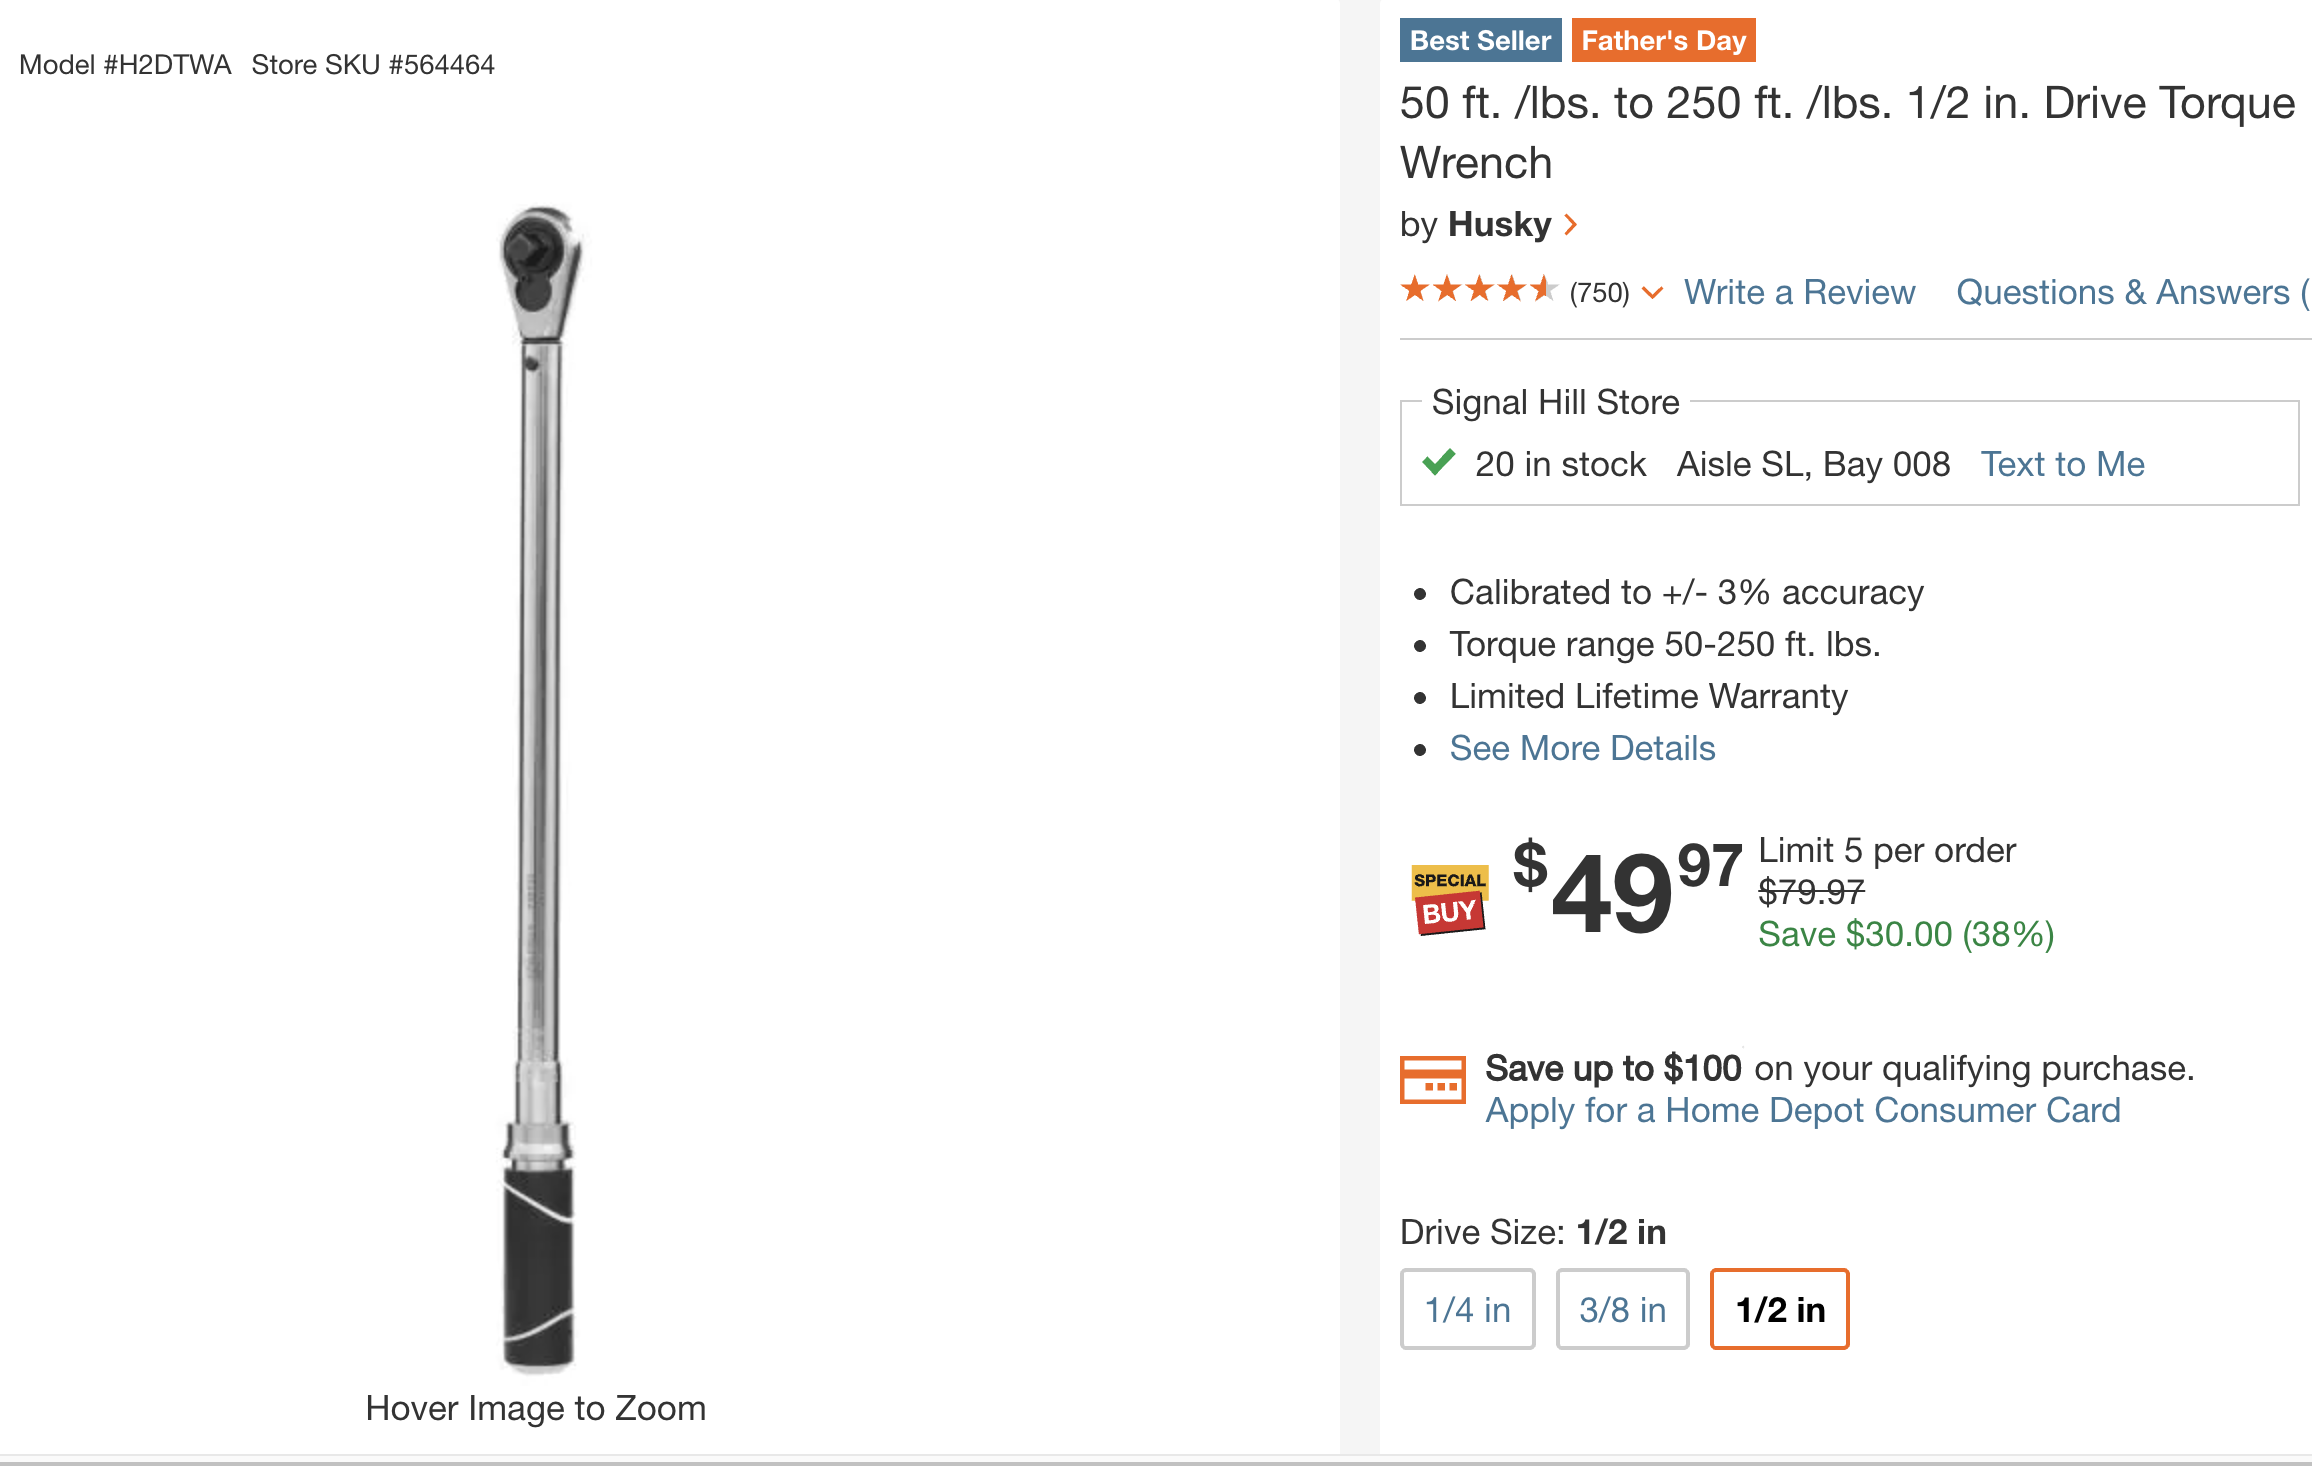 Husky 50 ft. /lbs. to 250 ft. /lbs. 1/2 in. Drive Torque Wrench - $49.97